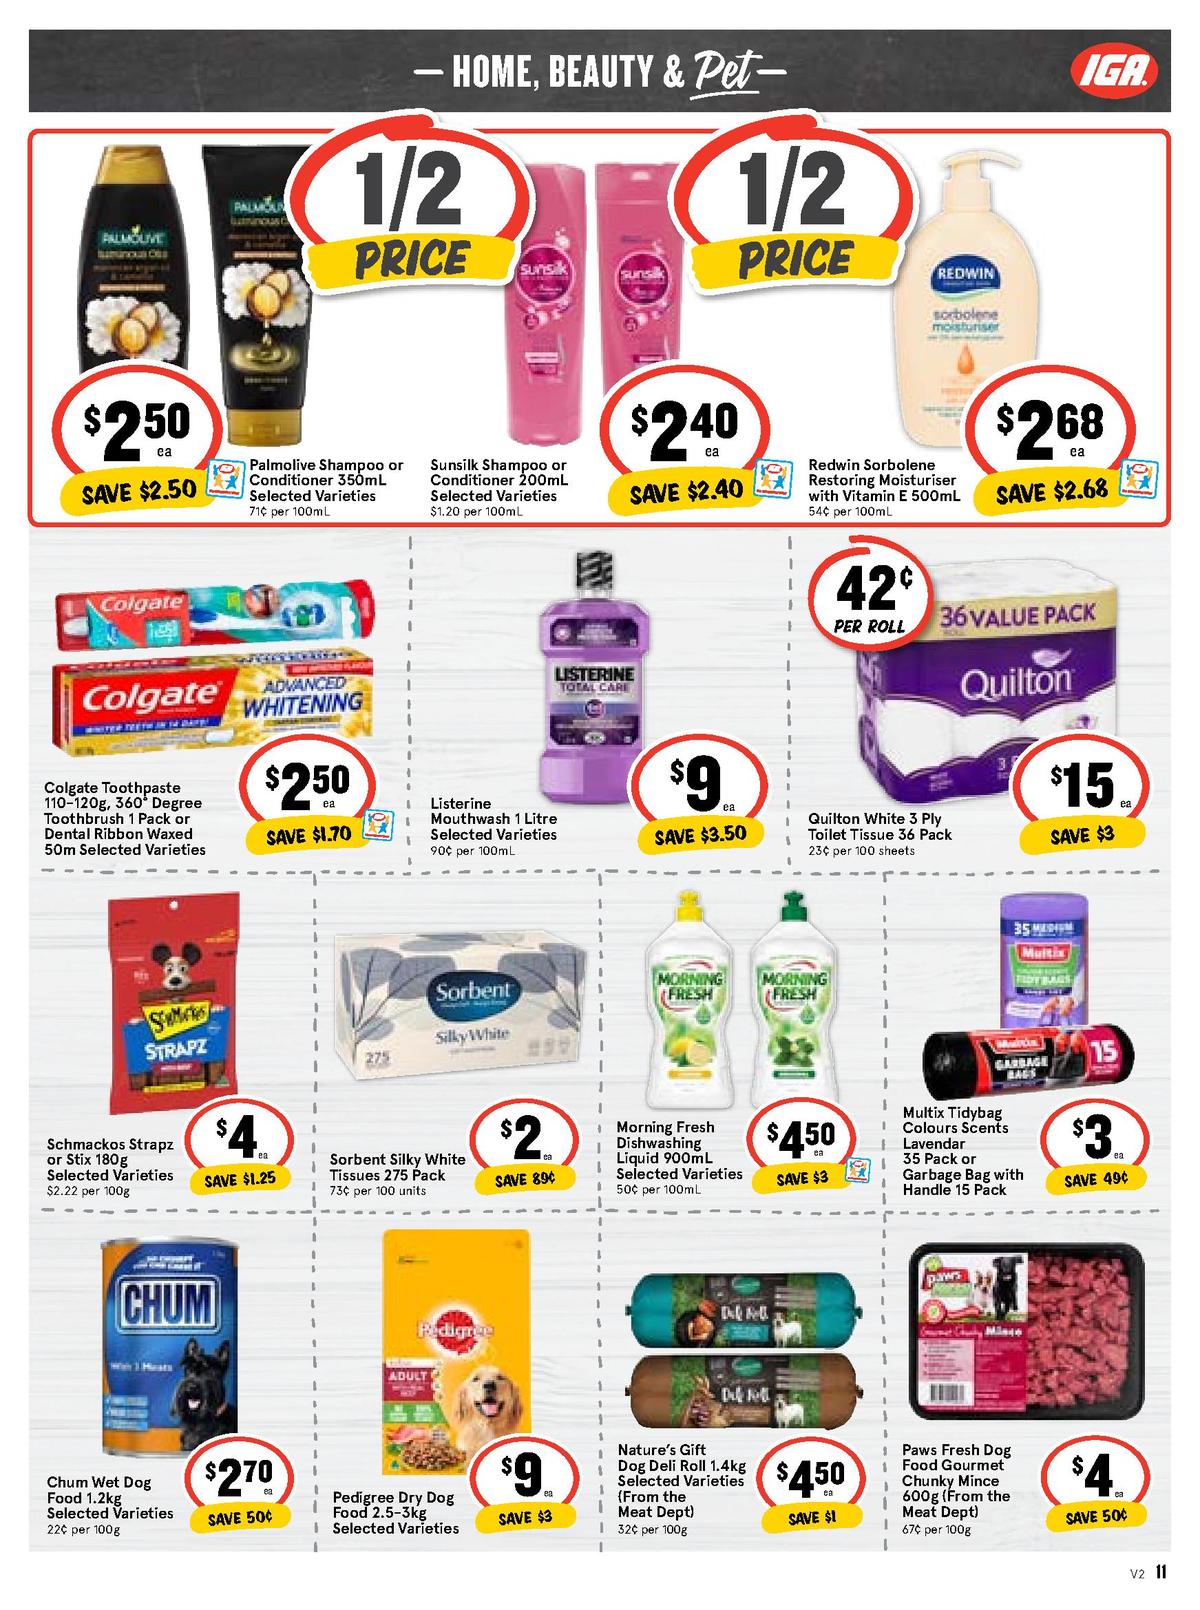 IGA Catalogues from 30 October